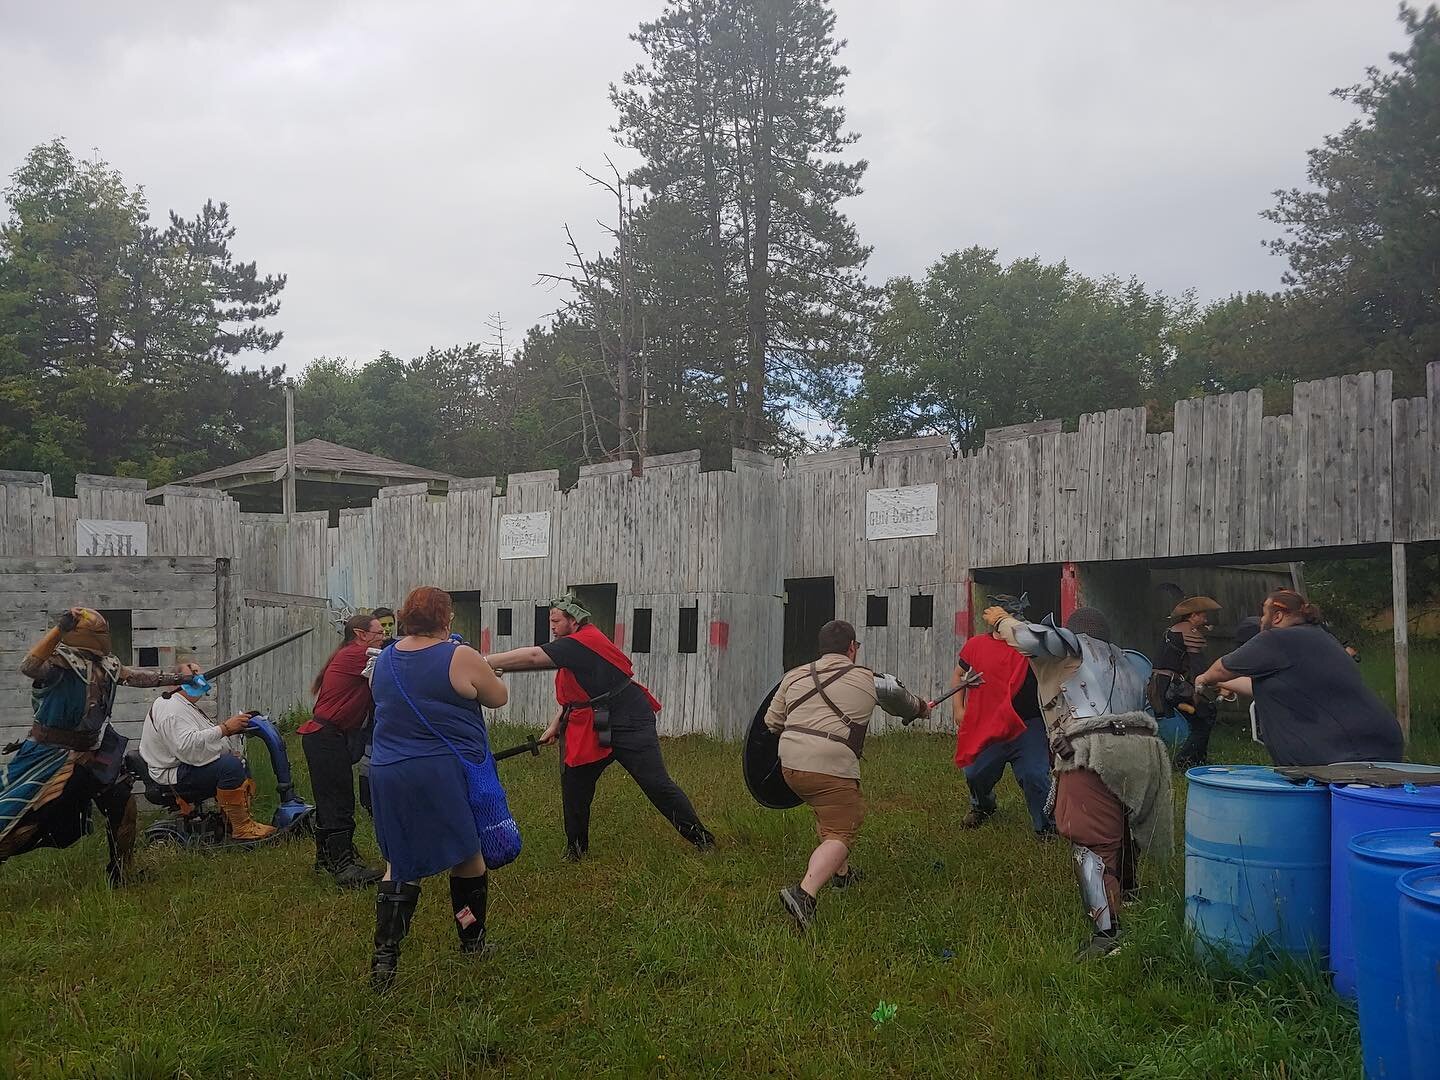 Castle Combat! This was our final battle of our first ever weekend. The site has a few castle settings, so we though to take advantage of it. Our scholars sought to set up a security system inside the courtyard and needed to be protected against the 